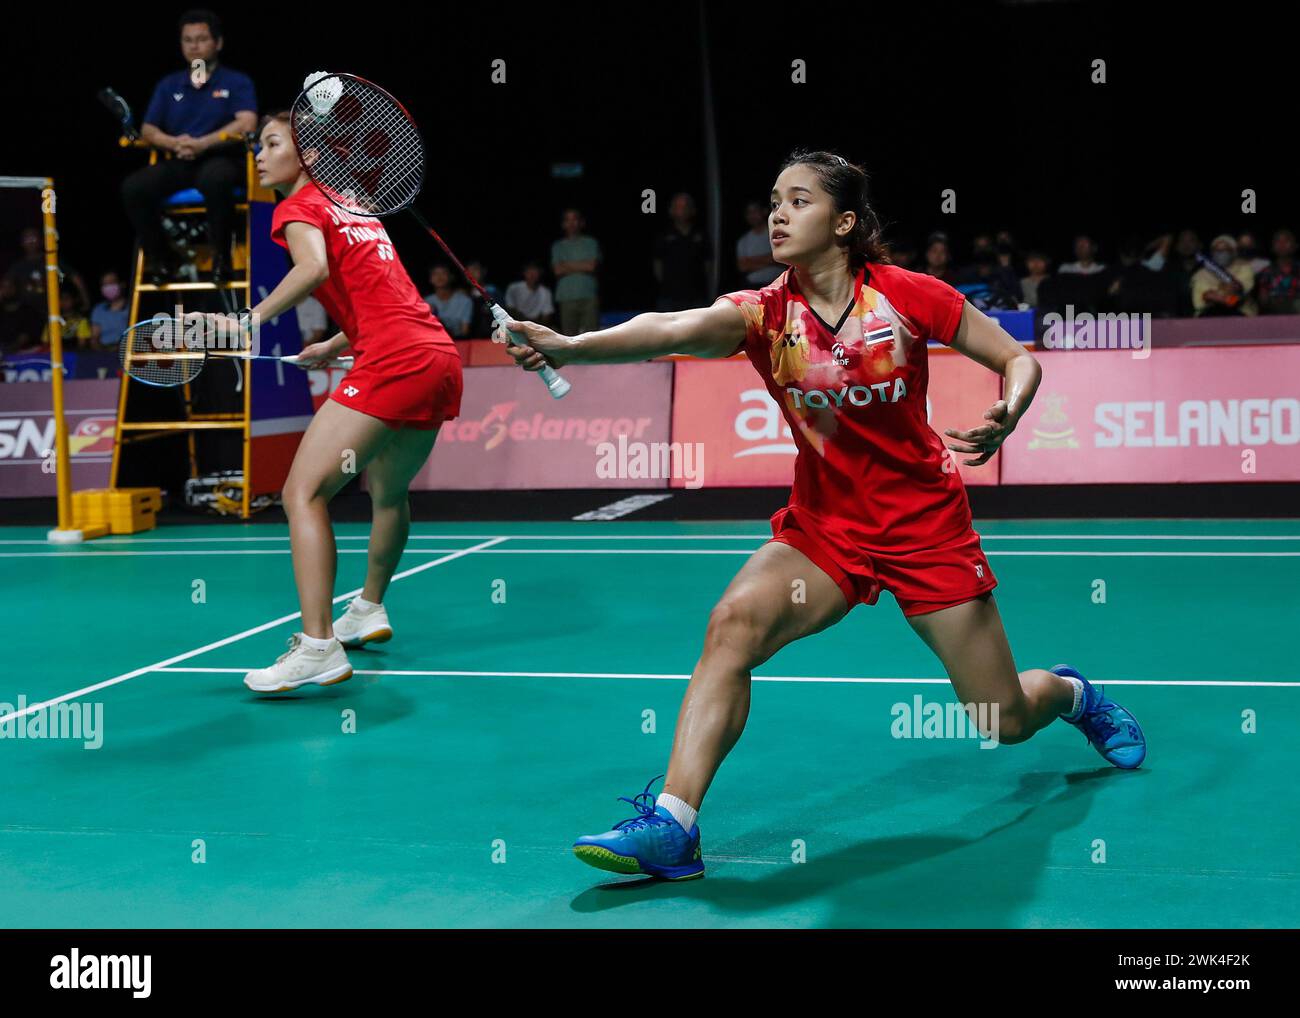 Kuala Lumpur, Malaysia. 18th Feb, 2024. Jongkolphan Kititharakul (L) and Rawinda Projongjai of Thailand seen in action against Gayatri Gopichand Pullela and Treesa Jolly of India (not pictured) during the Women's Doubles final match at the Badminton Asia Team Championships 2024 at Setia City Convention Centre in Shah Alam. Gayatri Gopichand Pullela and Treesa Jolly won with scores; 21/18/21 : 16/21/16. (Photo by Wong Fok Loy/SOPA Images/Sipa USA) Credit: Sipa USA/Alamy Live News Stock Photo